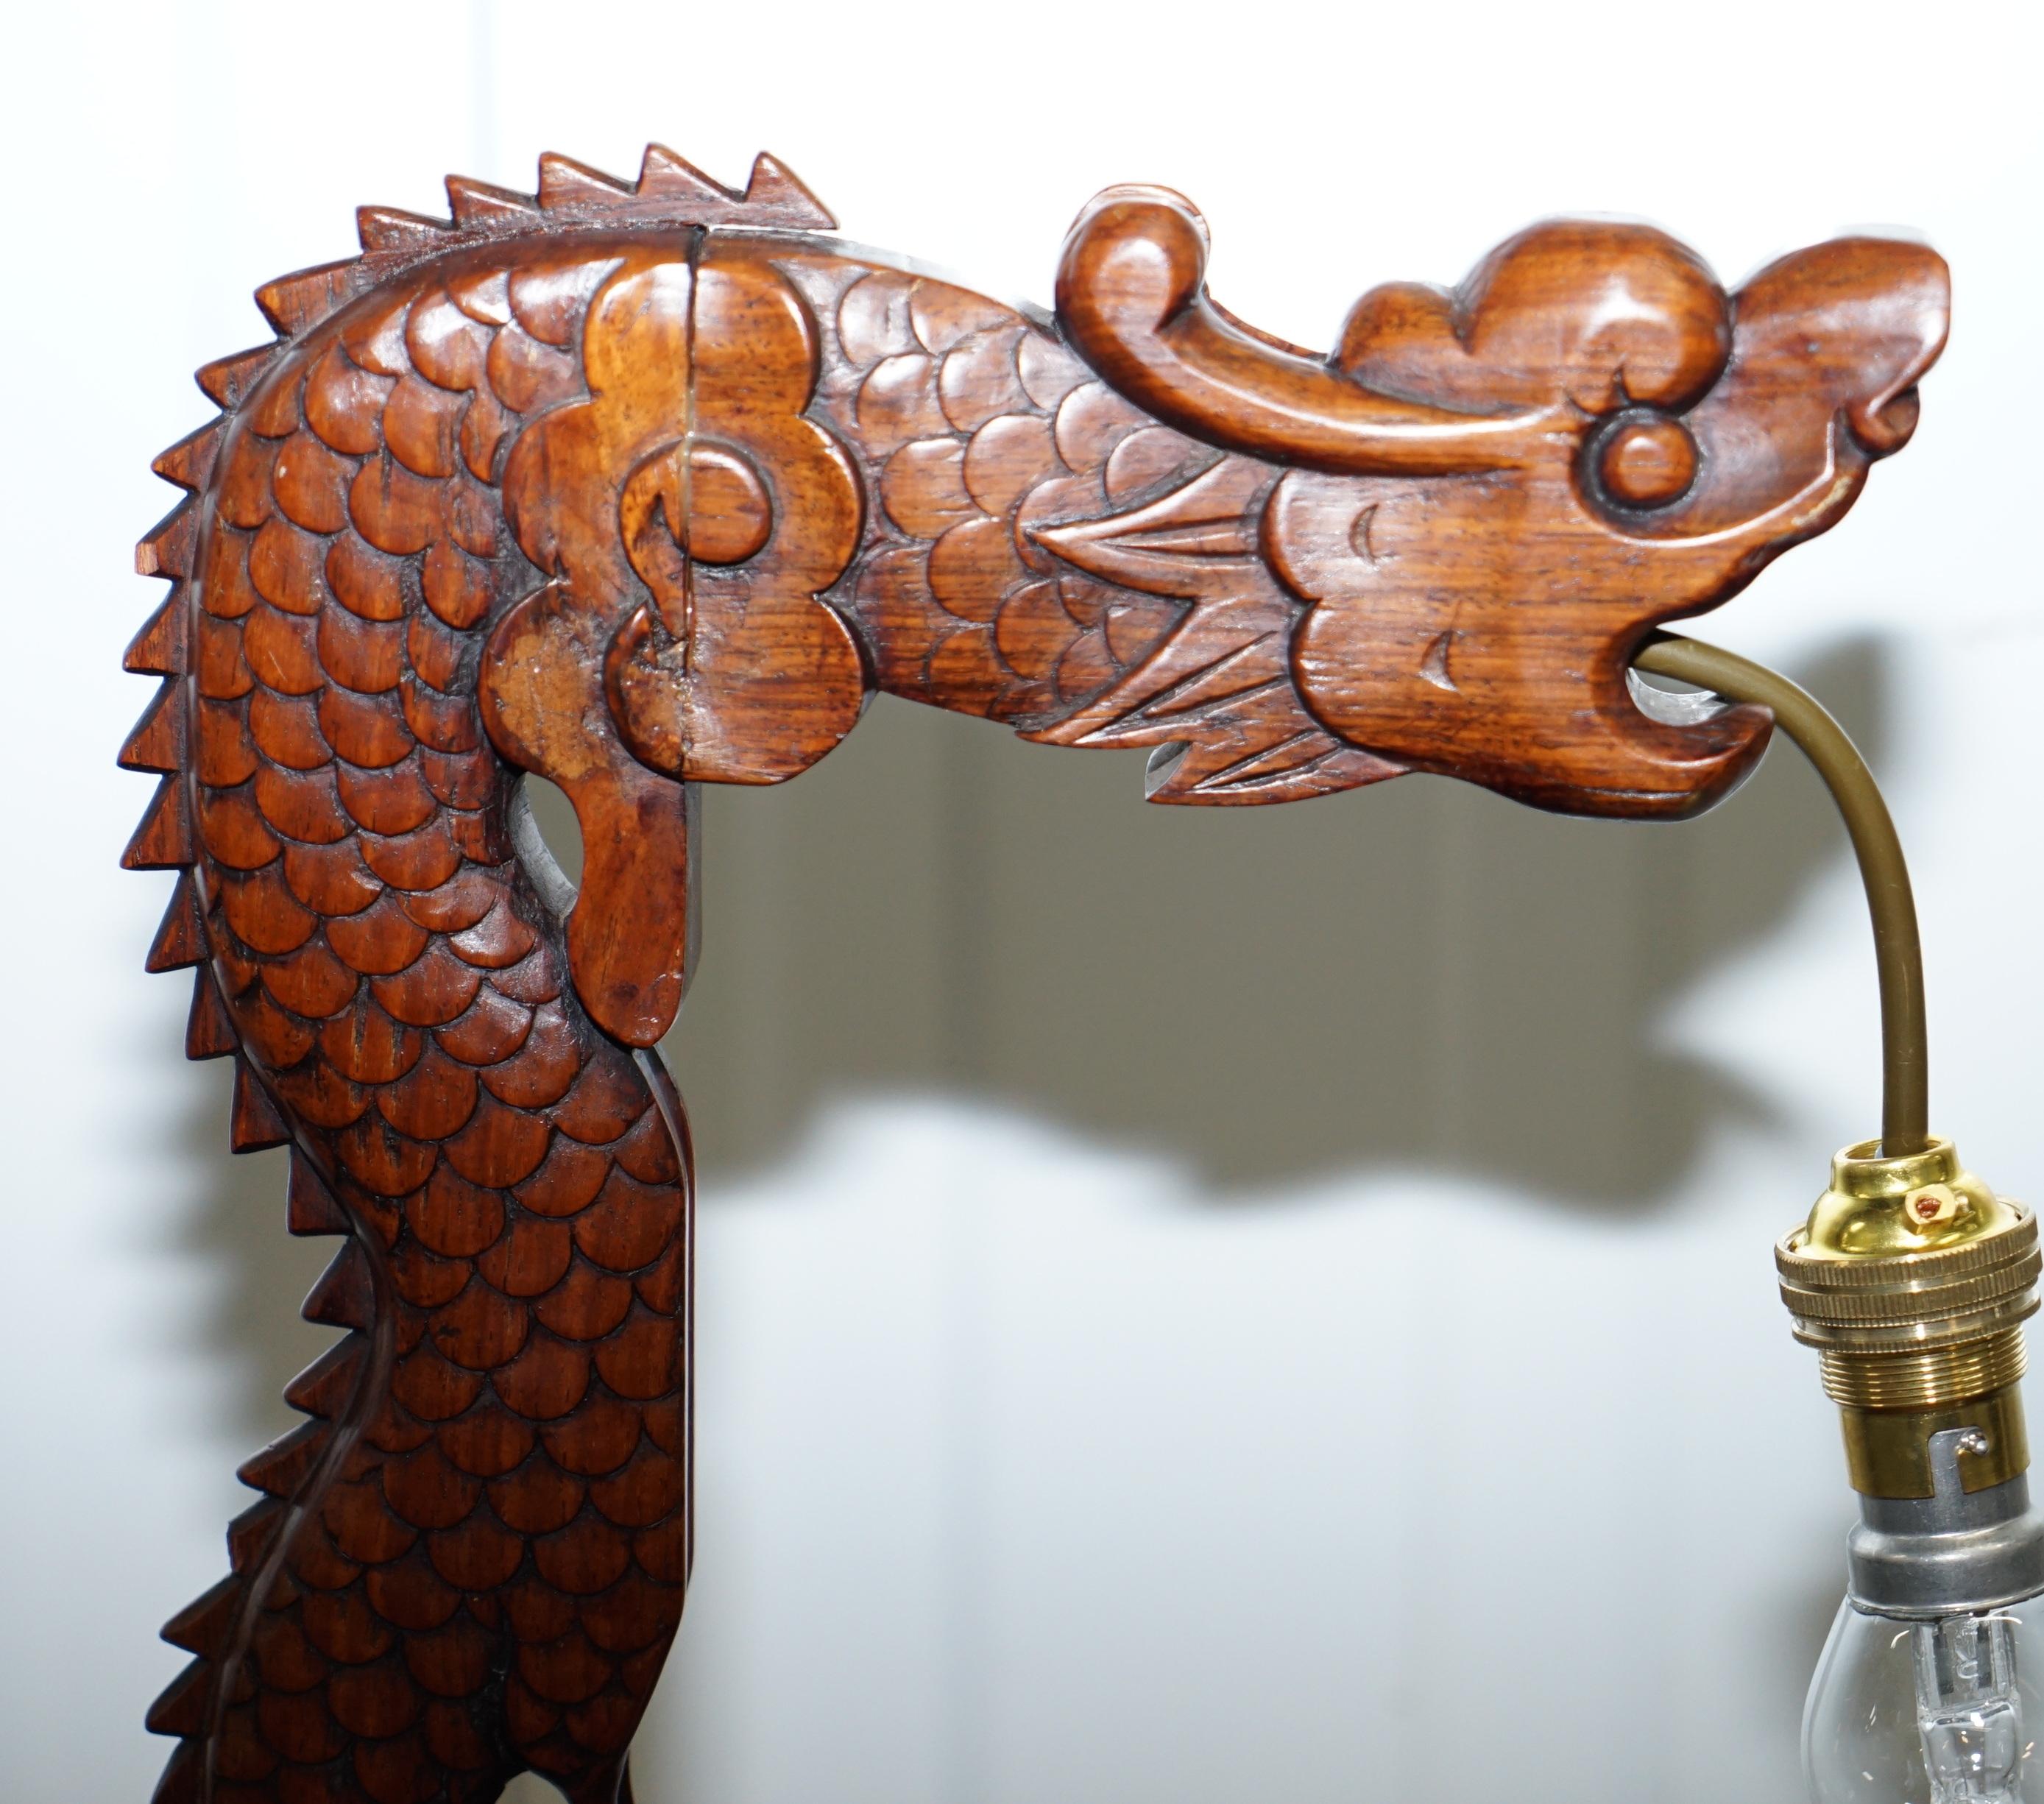 Chinese Export Pair of Chinese Mahogany Dragon 1920s Hand-Carved Wood Table Lamps Part of Set